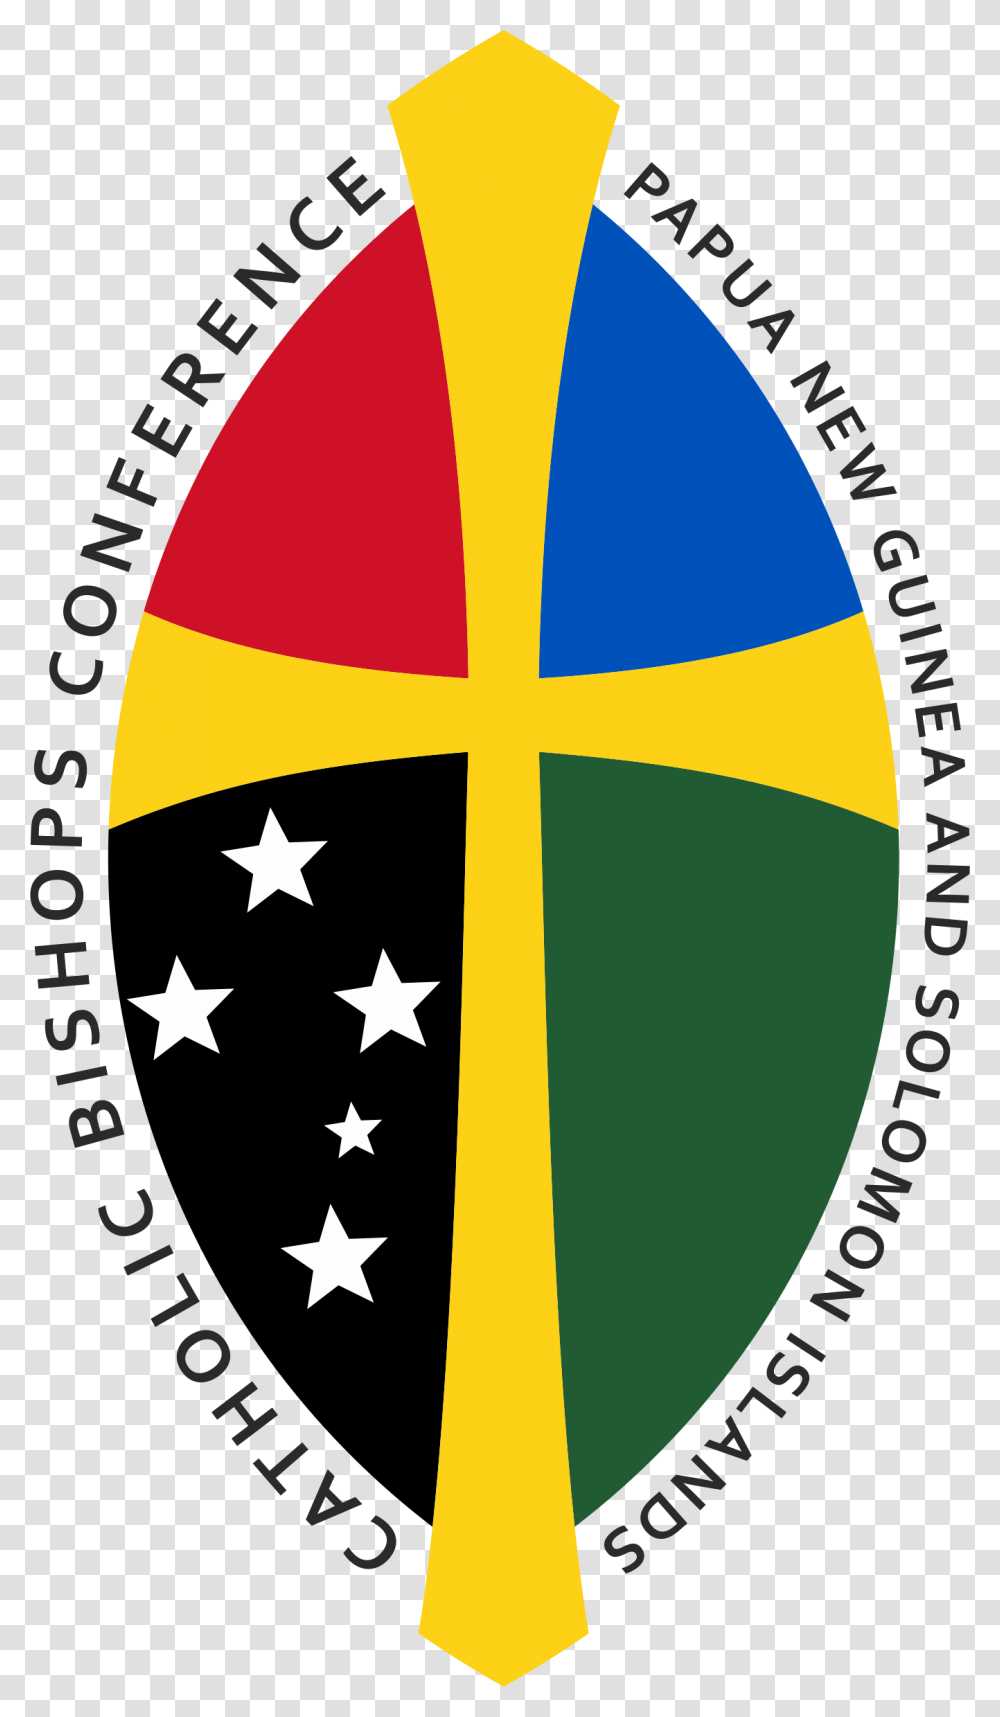 Catholic Bishops Conference Papua New Guinea And Solomon Fiora Shower Tray Cappuccino, Logo, Trademark Transparent Png